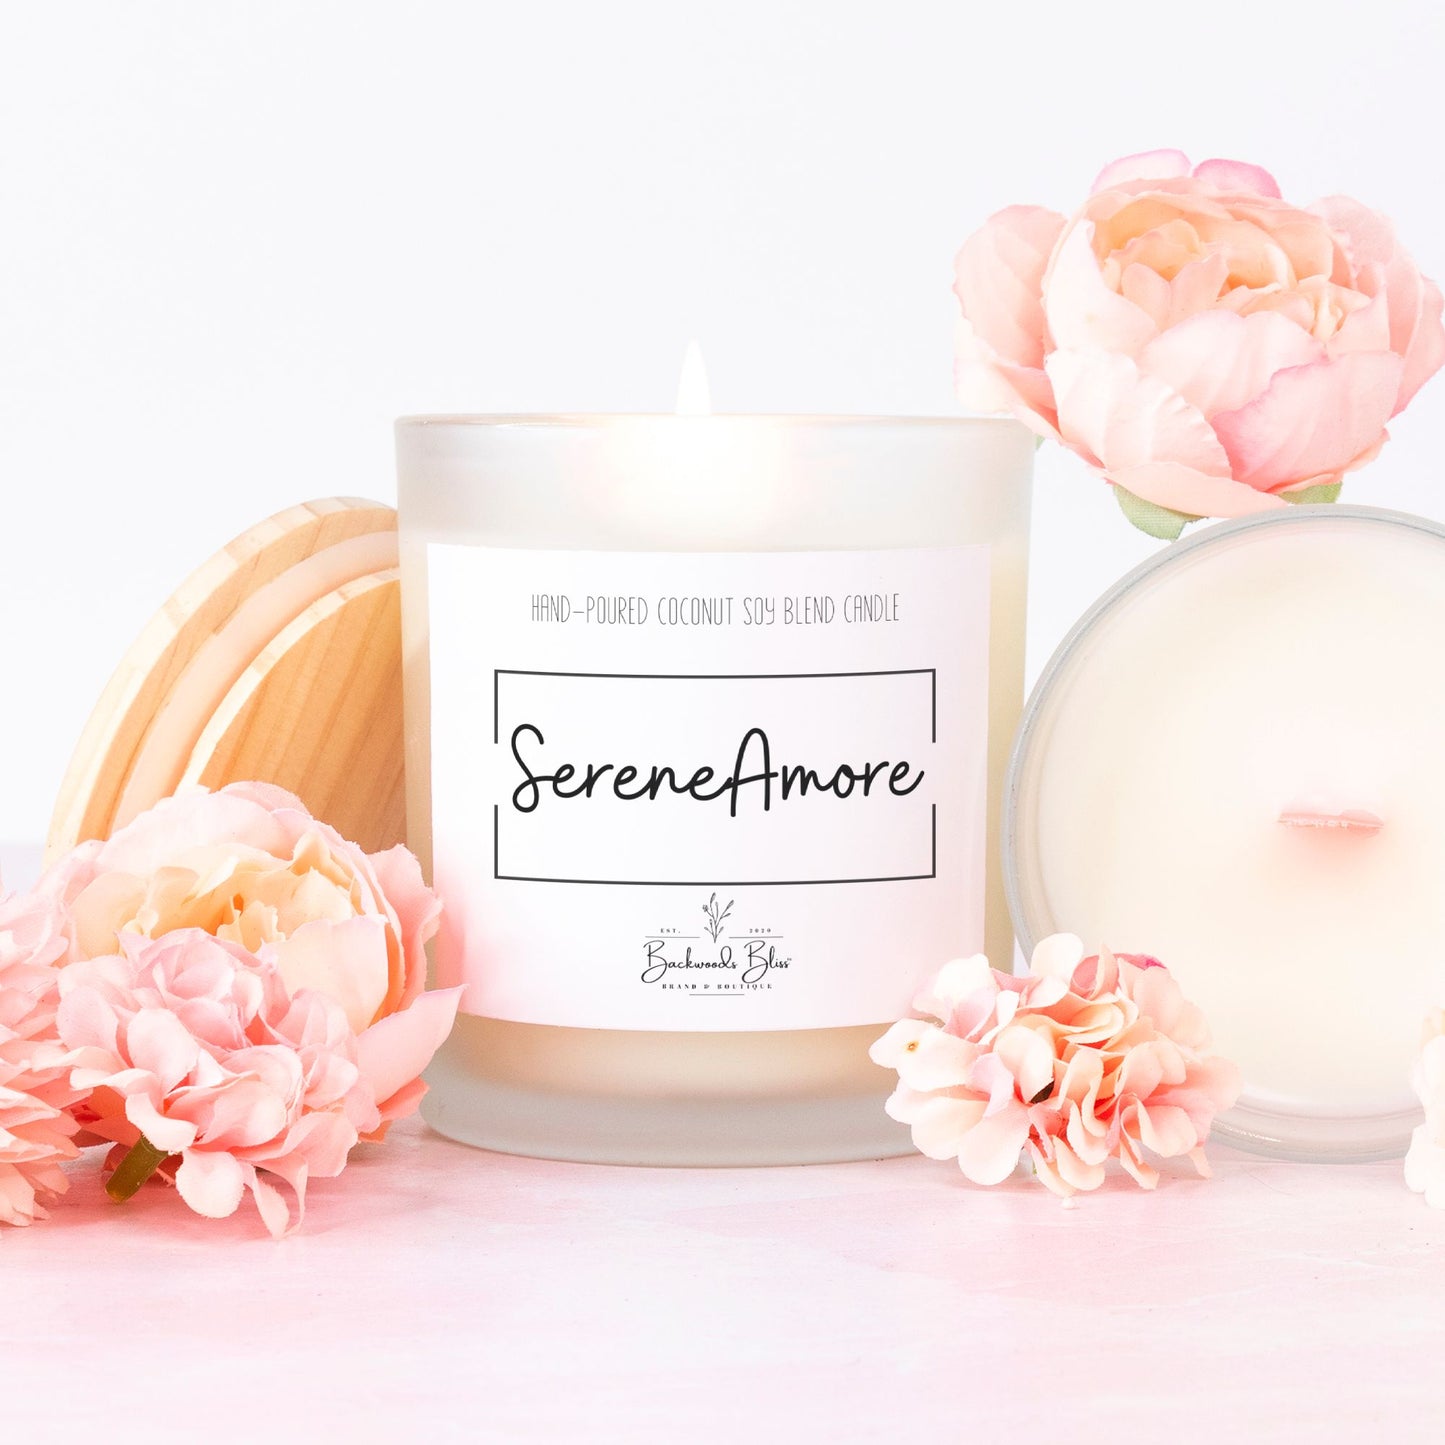 11 oz. "SereneAmore" Handmade Woodwick Candle-Frosted